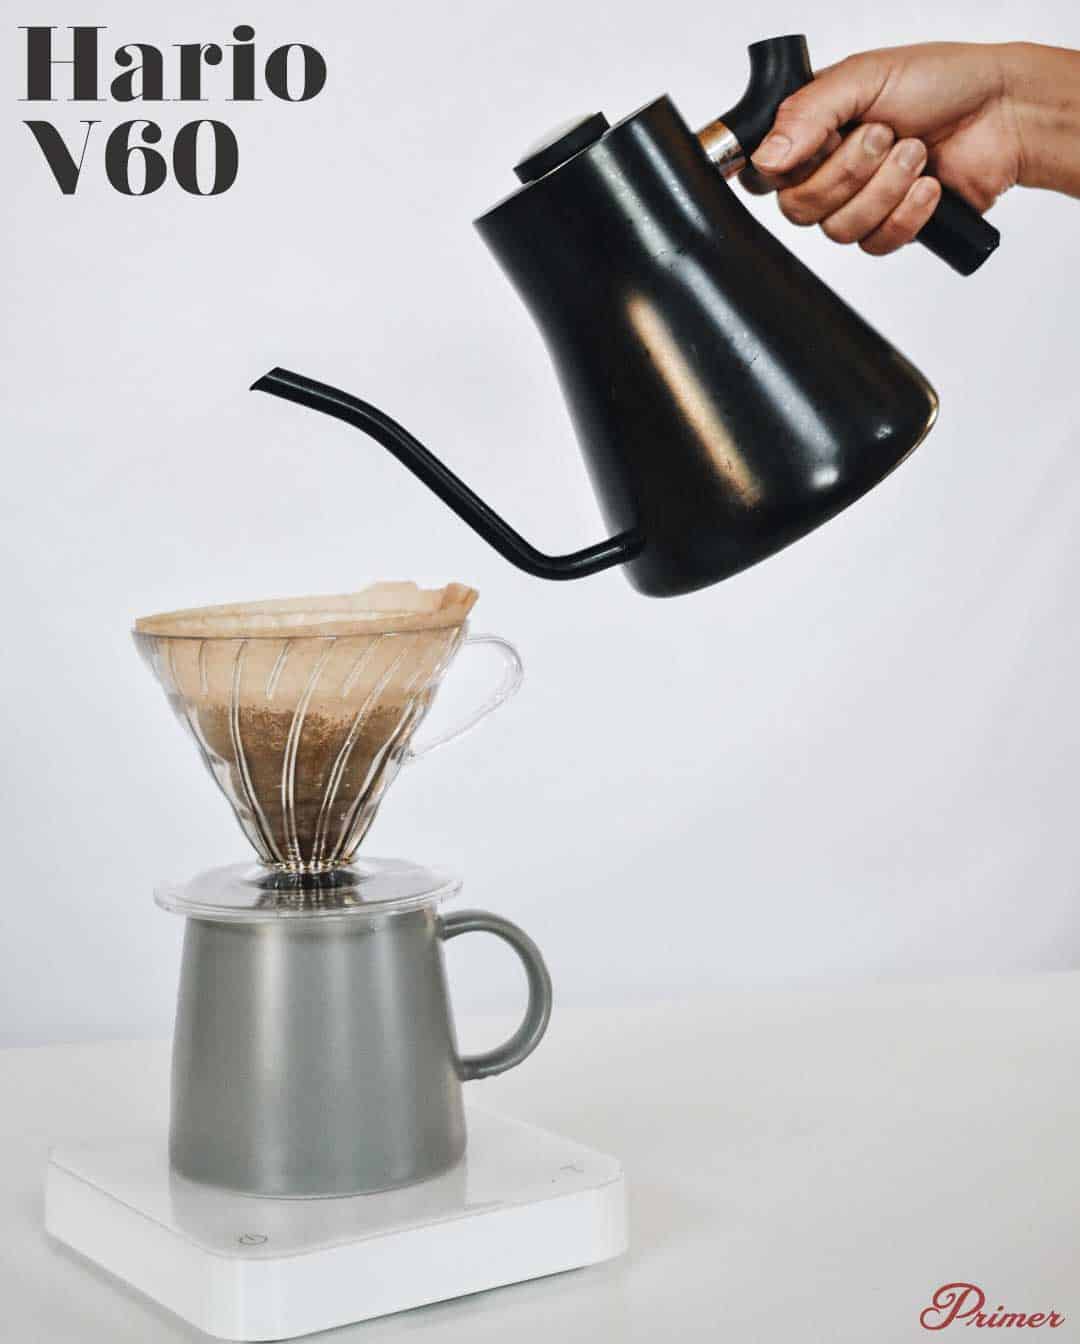 hario v60 coffee dripper differences best brewers